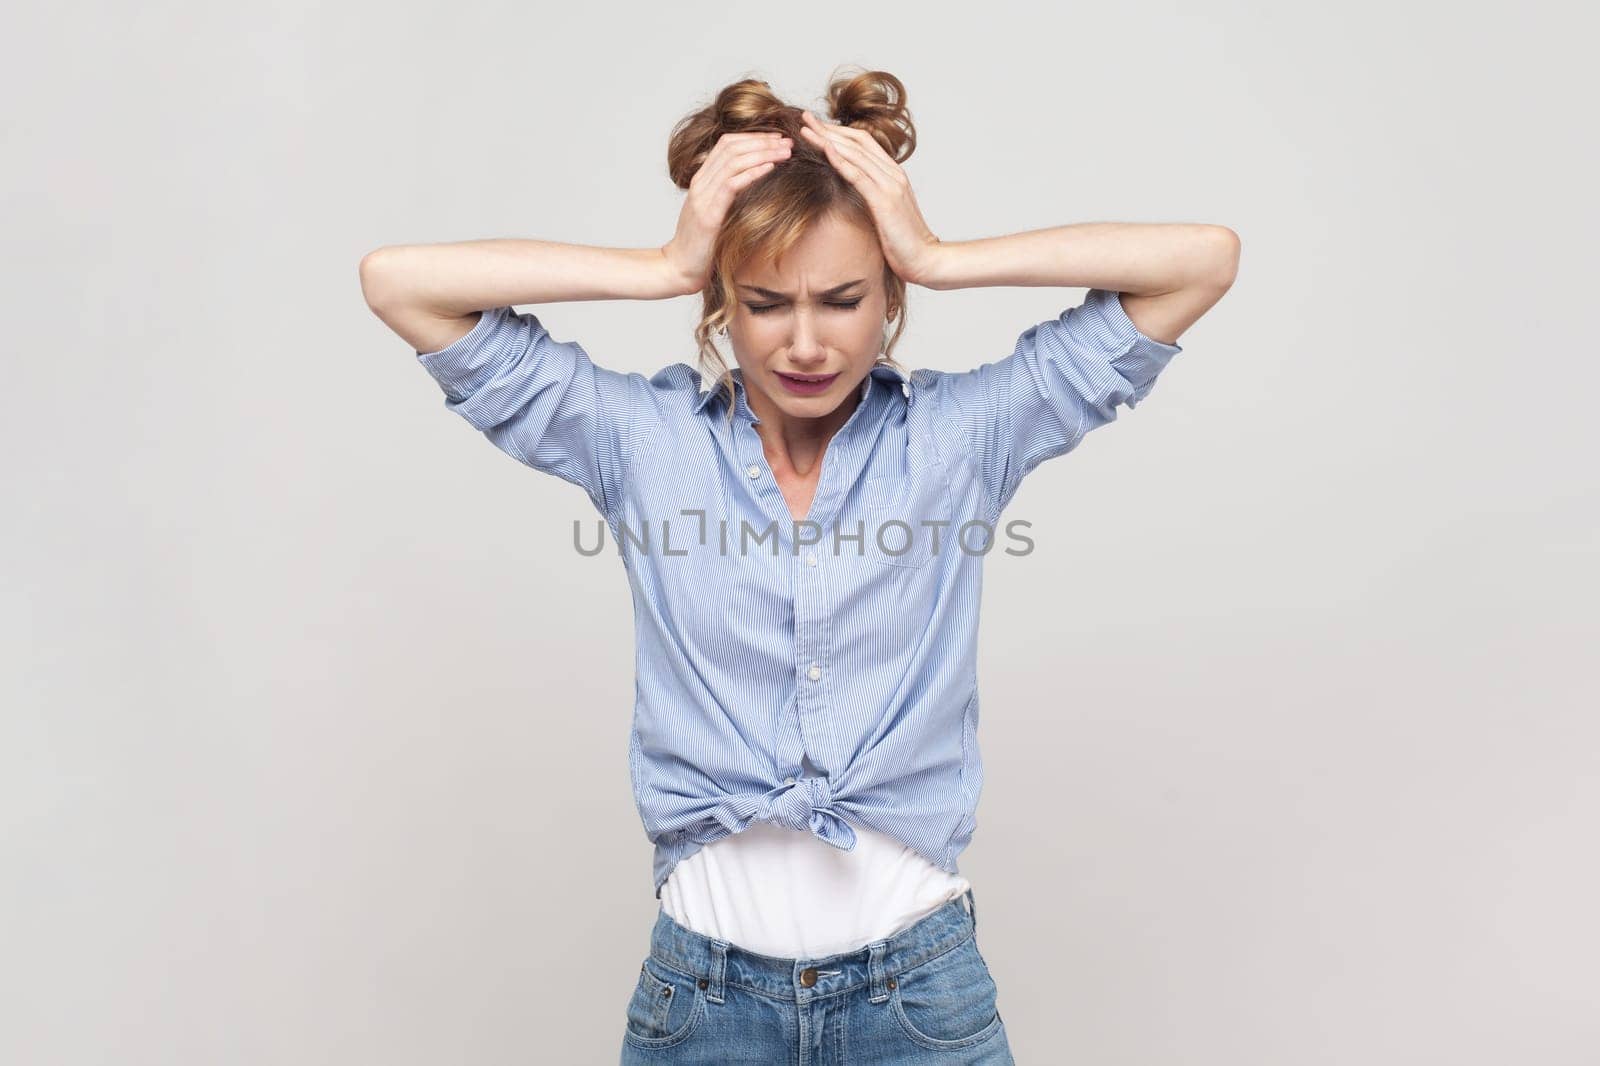 Portrait of blonde woman suffering from migraine, touching head, needs painkillers, cannot hold pain, feels discomfort, wearing blue shirt. Indoor studio shot isolated on gray background.